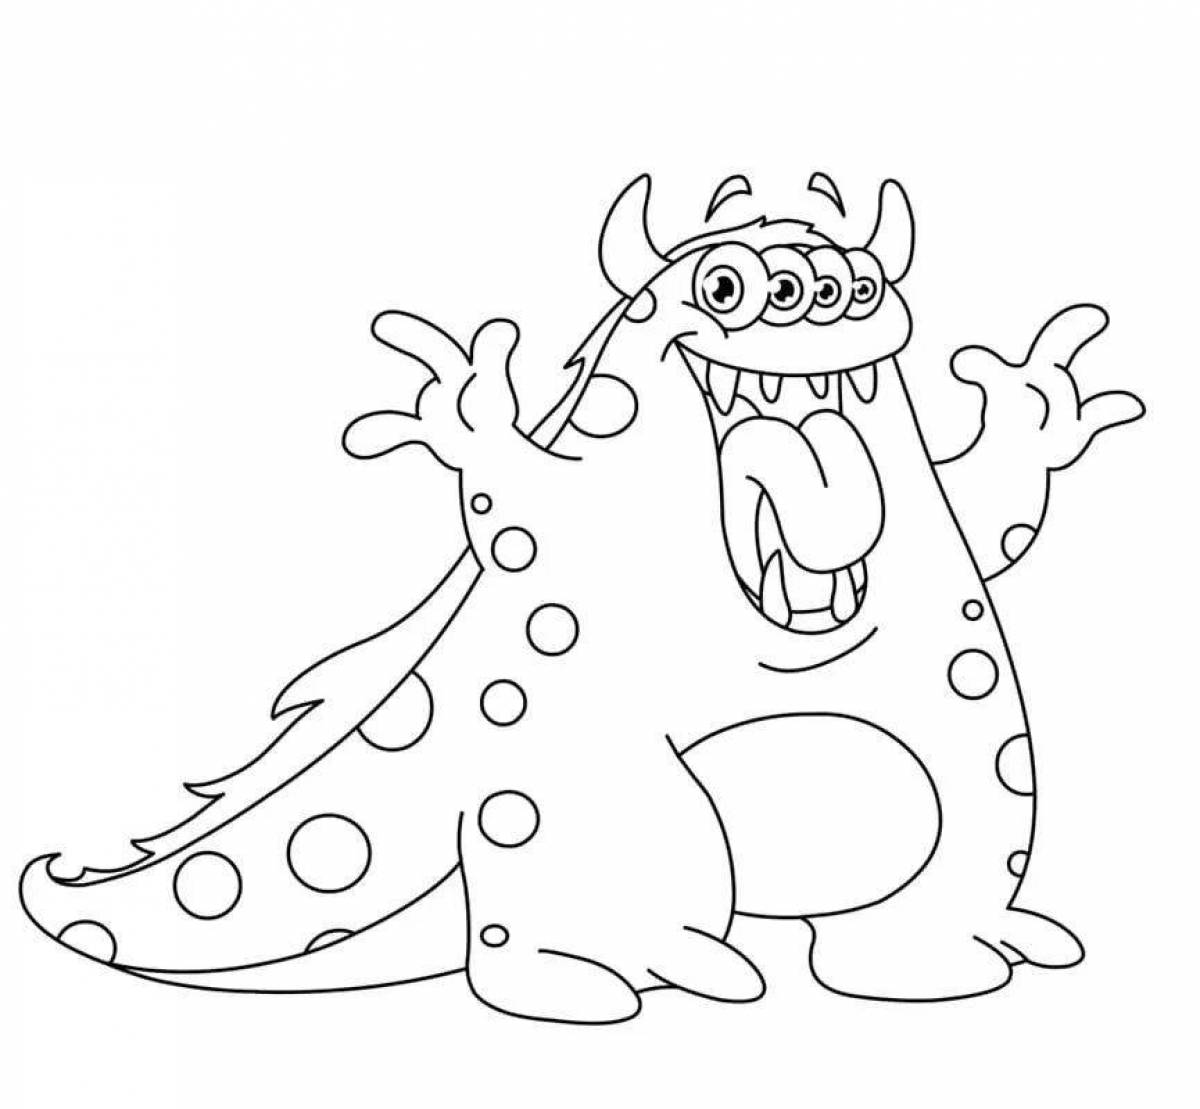 Amazing rainbow monster coloring pages